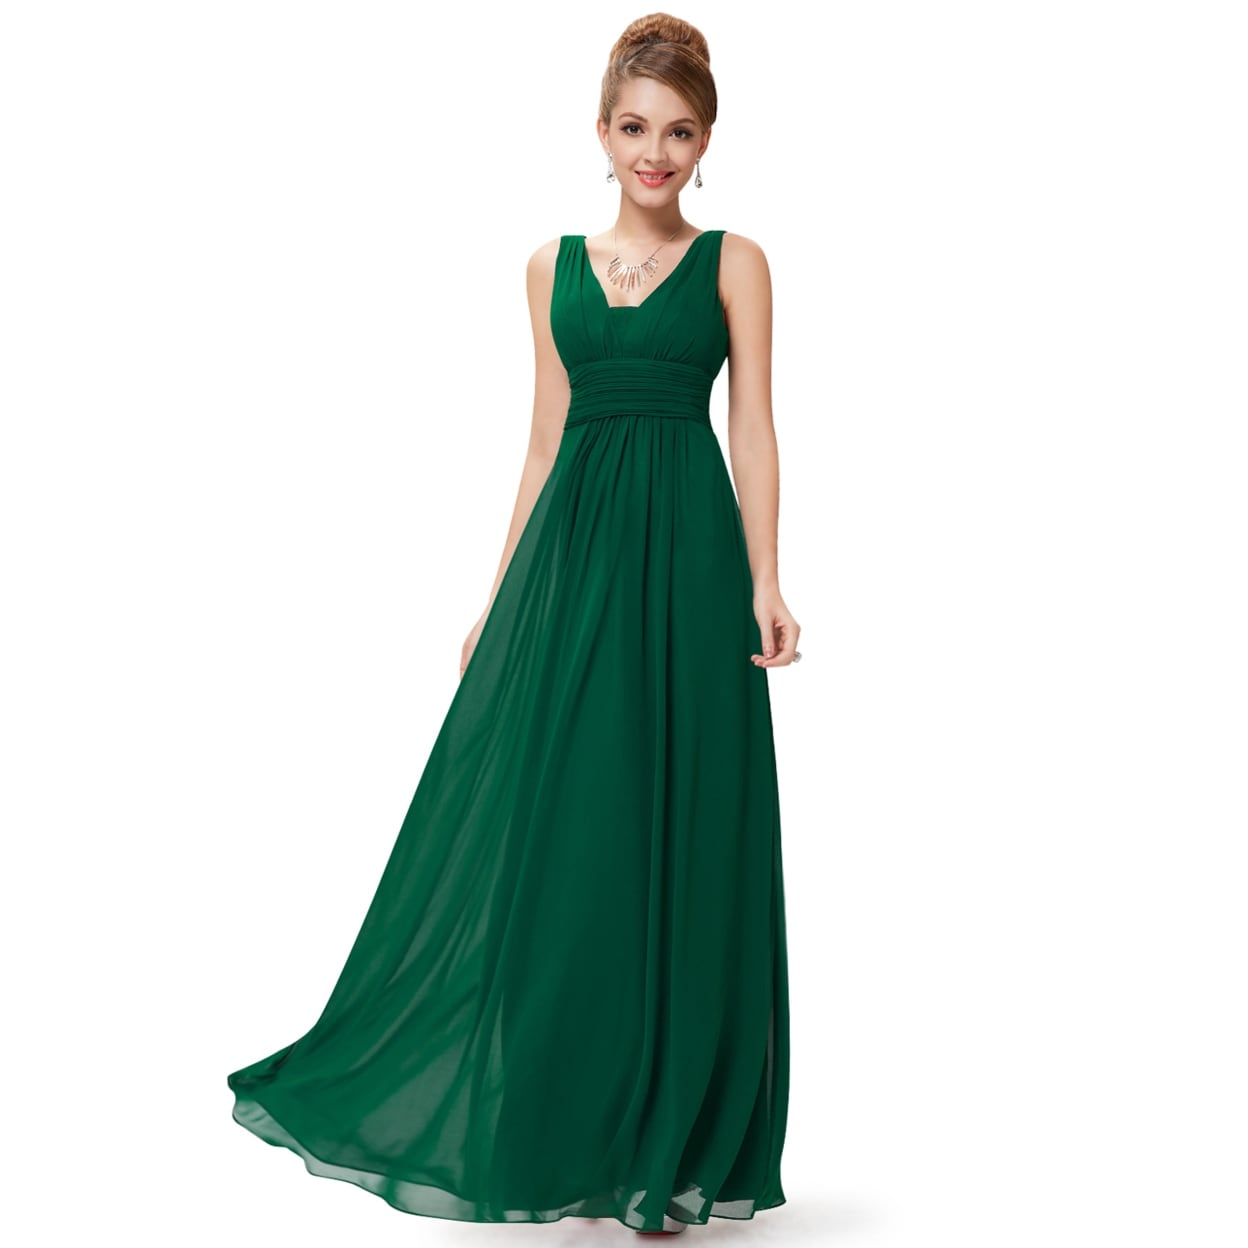 emerald green wedding guest outfit